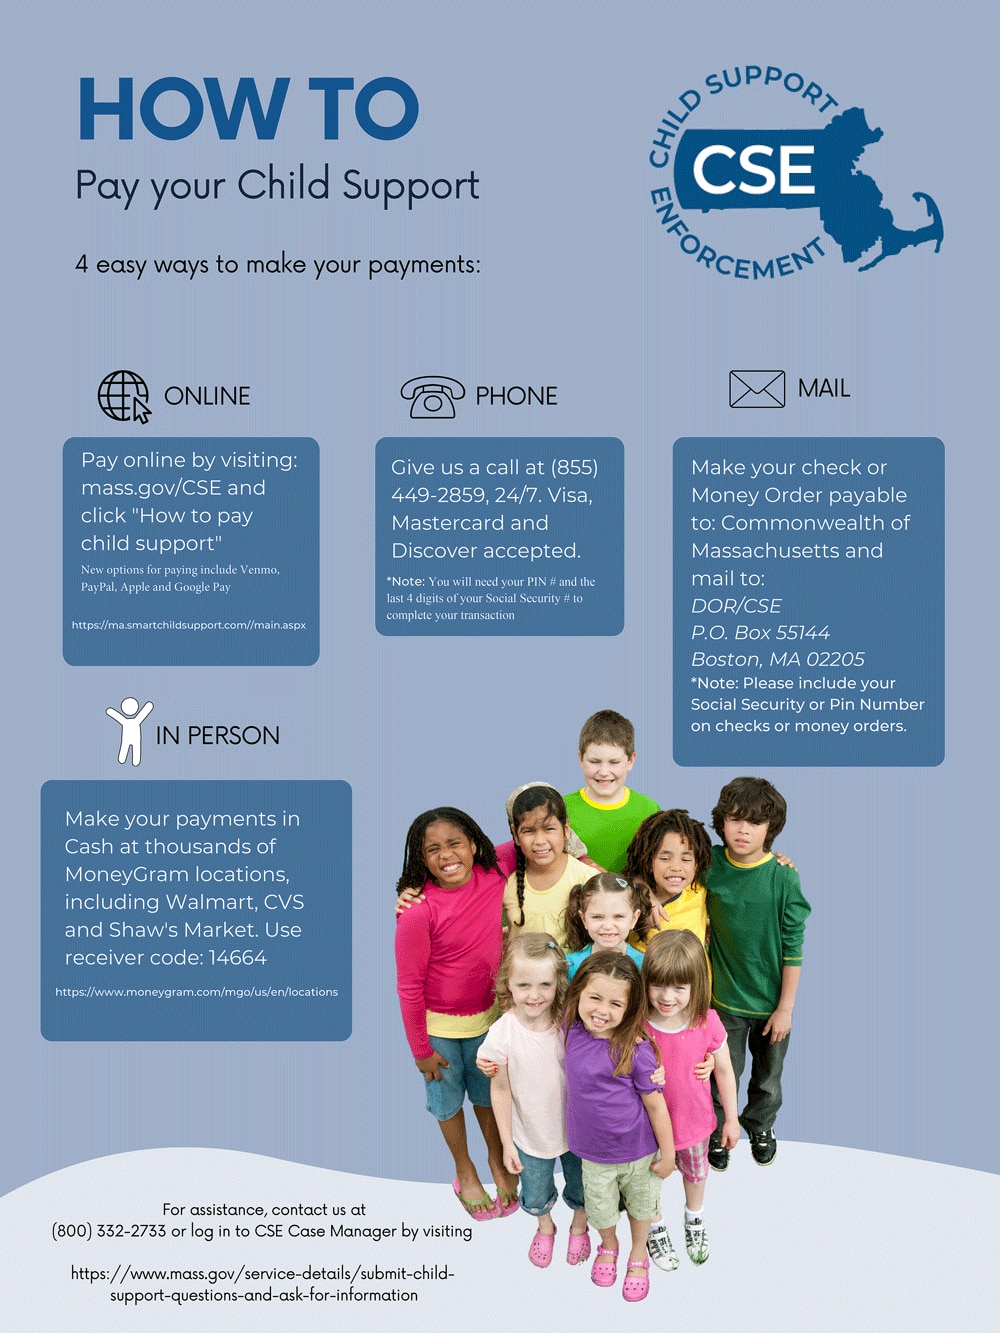 How to pay your child support: 4 easy ways to make your payments